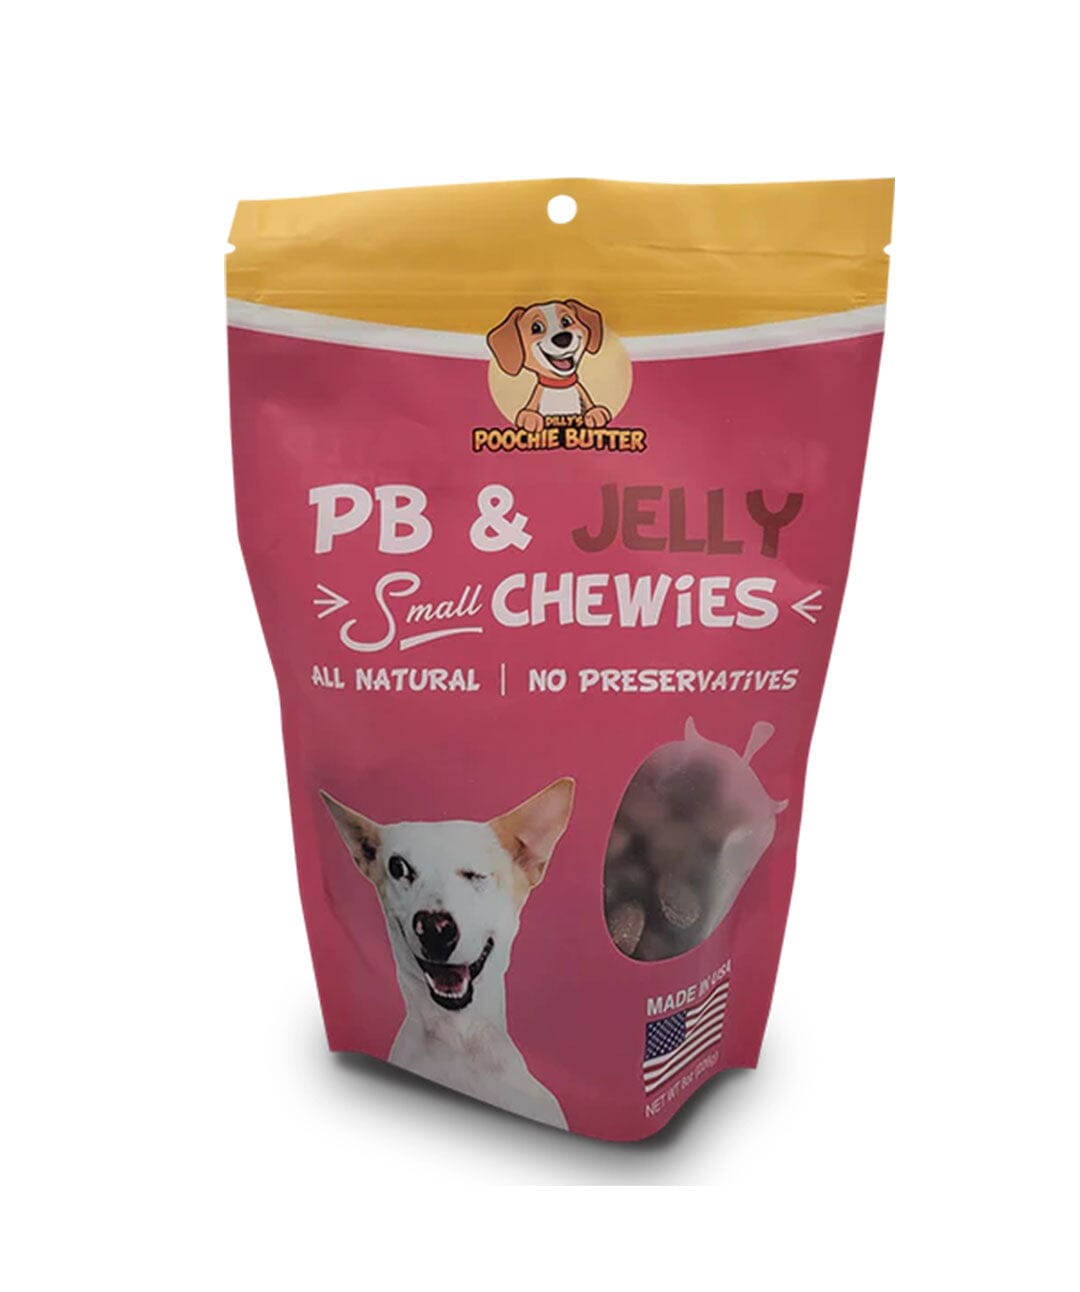 http://store.rover.com/cdn/shop/products/poochie-butter-peanut-butter-jelly-small-chewies-dog-treats-dog-treats-rover-998226.jpg?v=1689641043